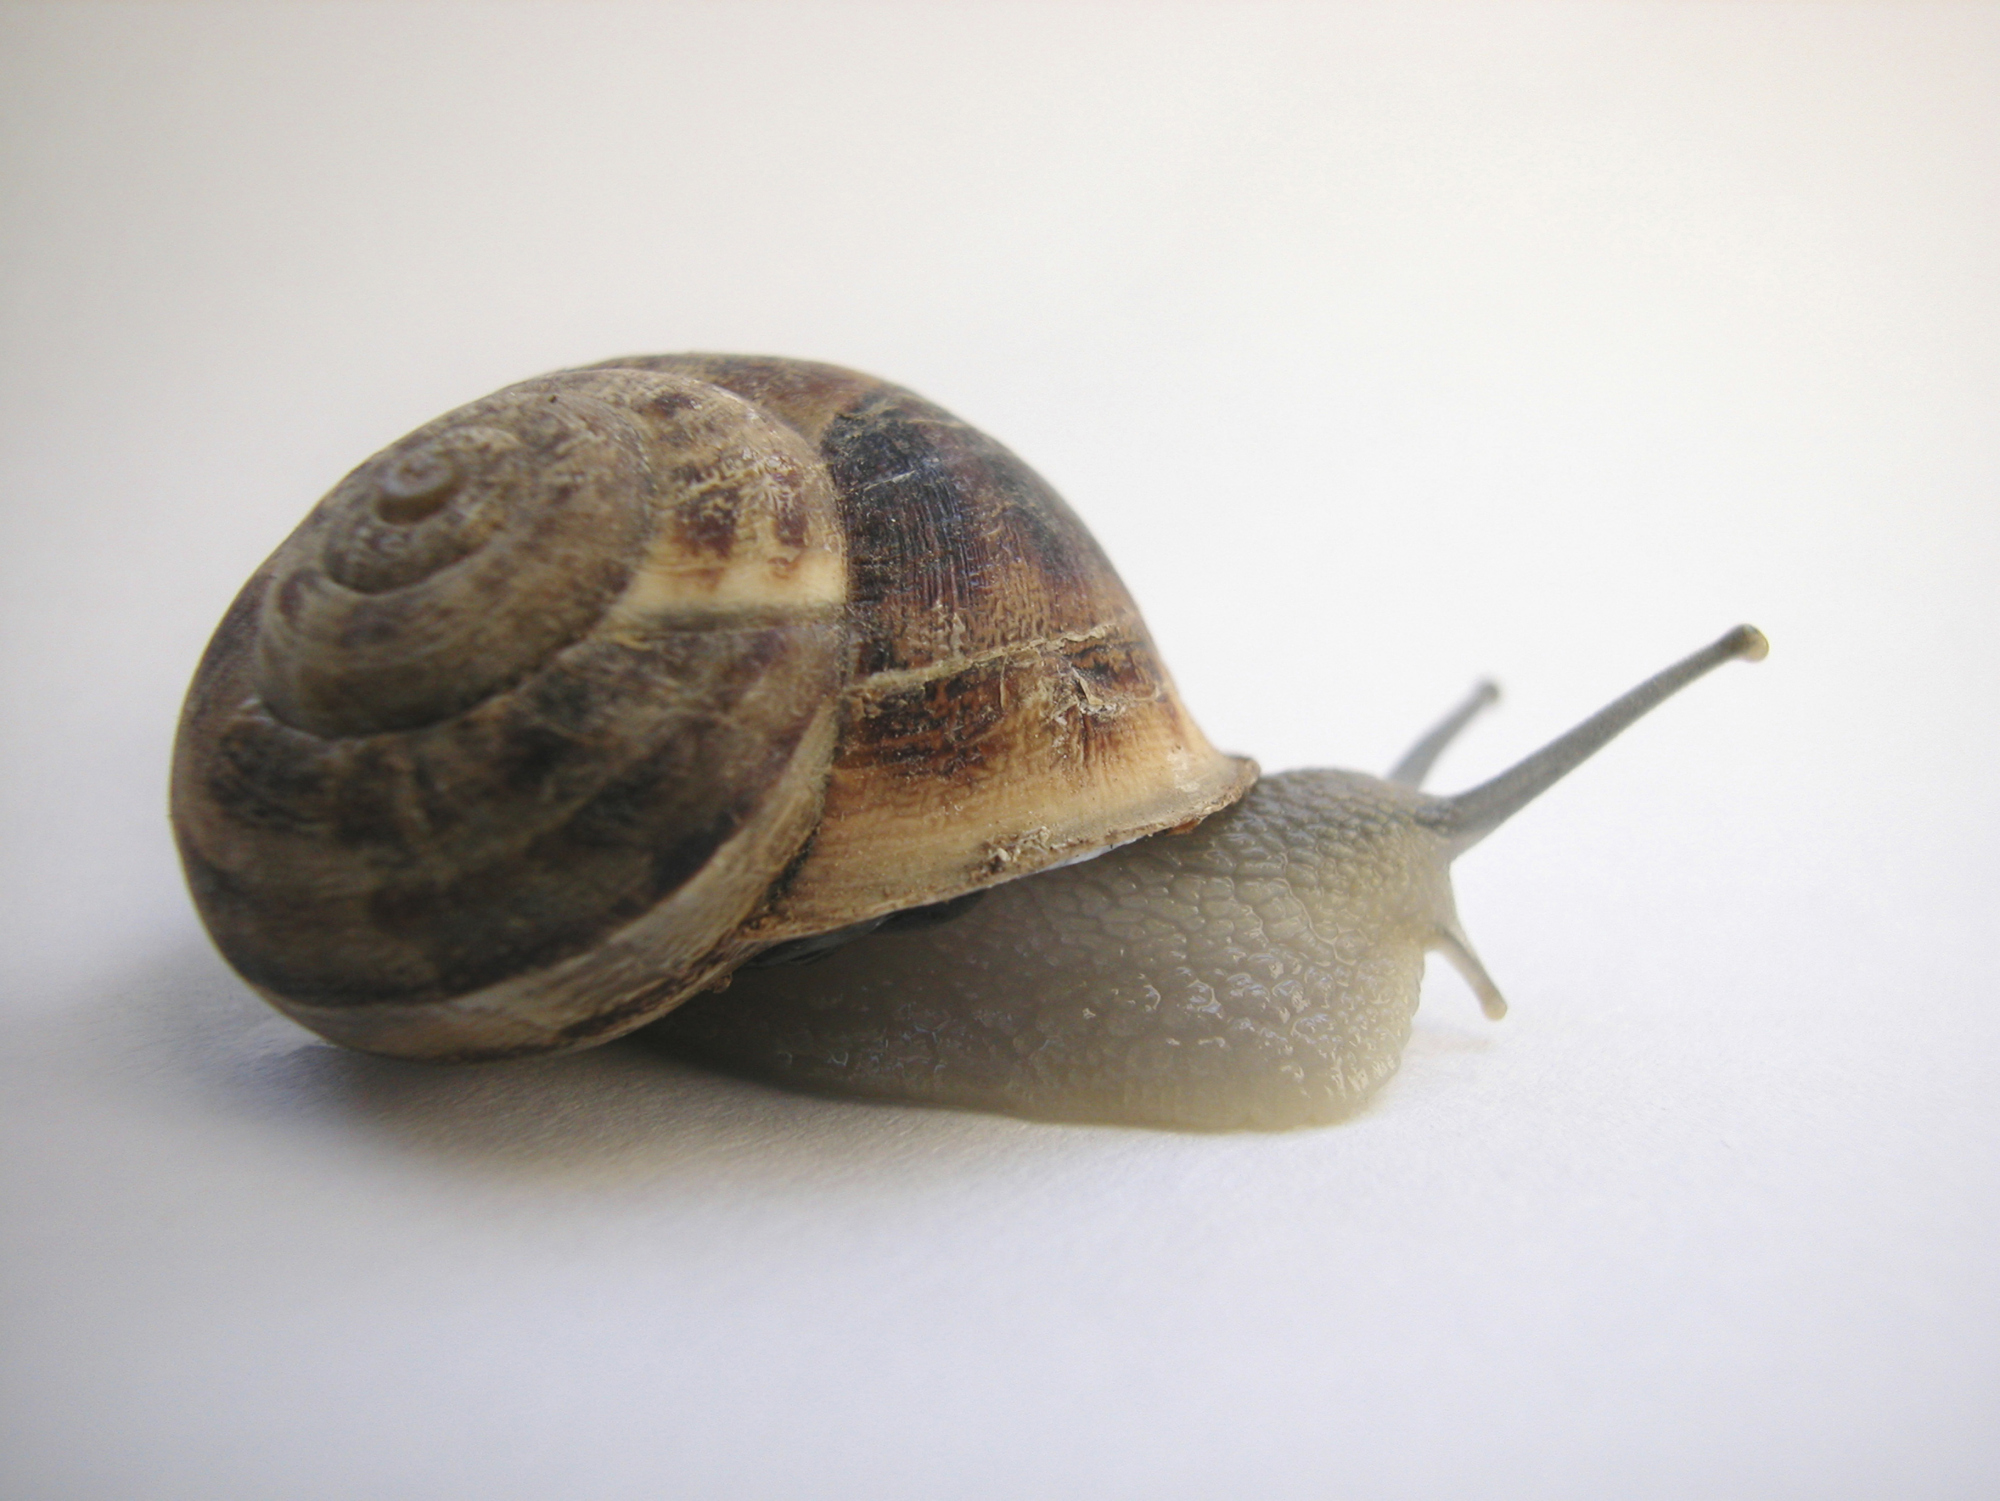 How to Care for a Periwinkle Snail | Animals - mom.me